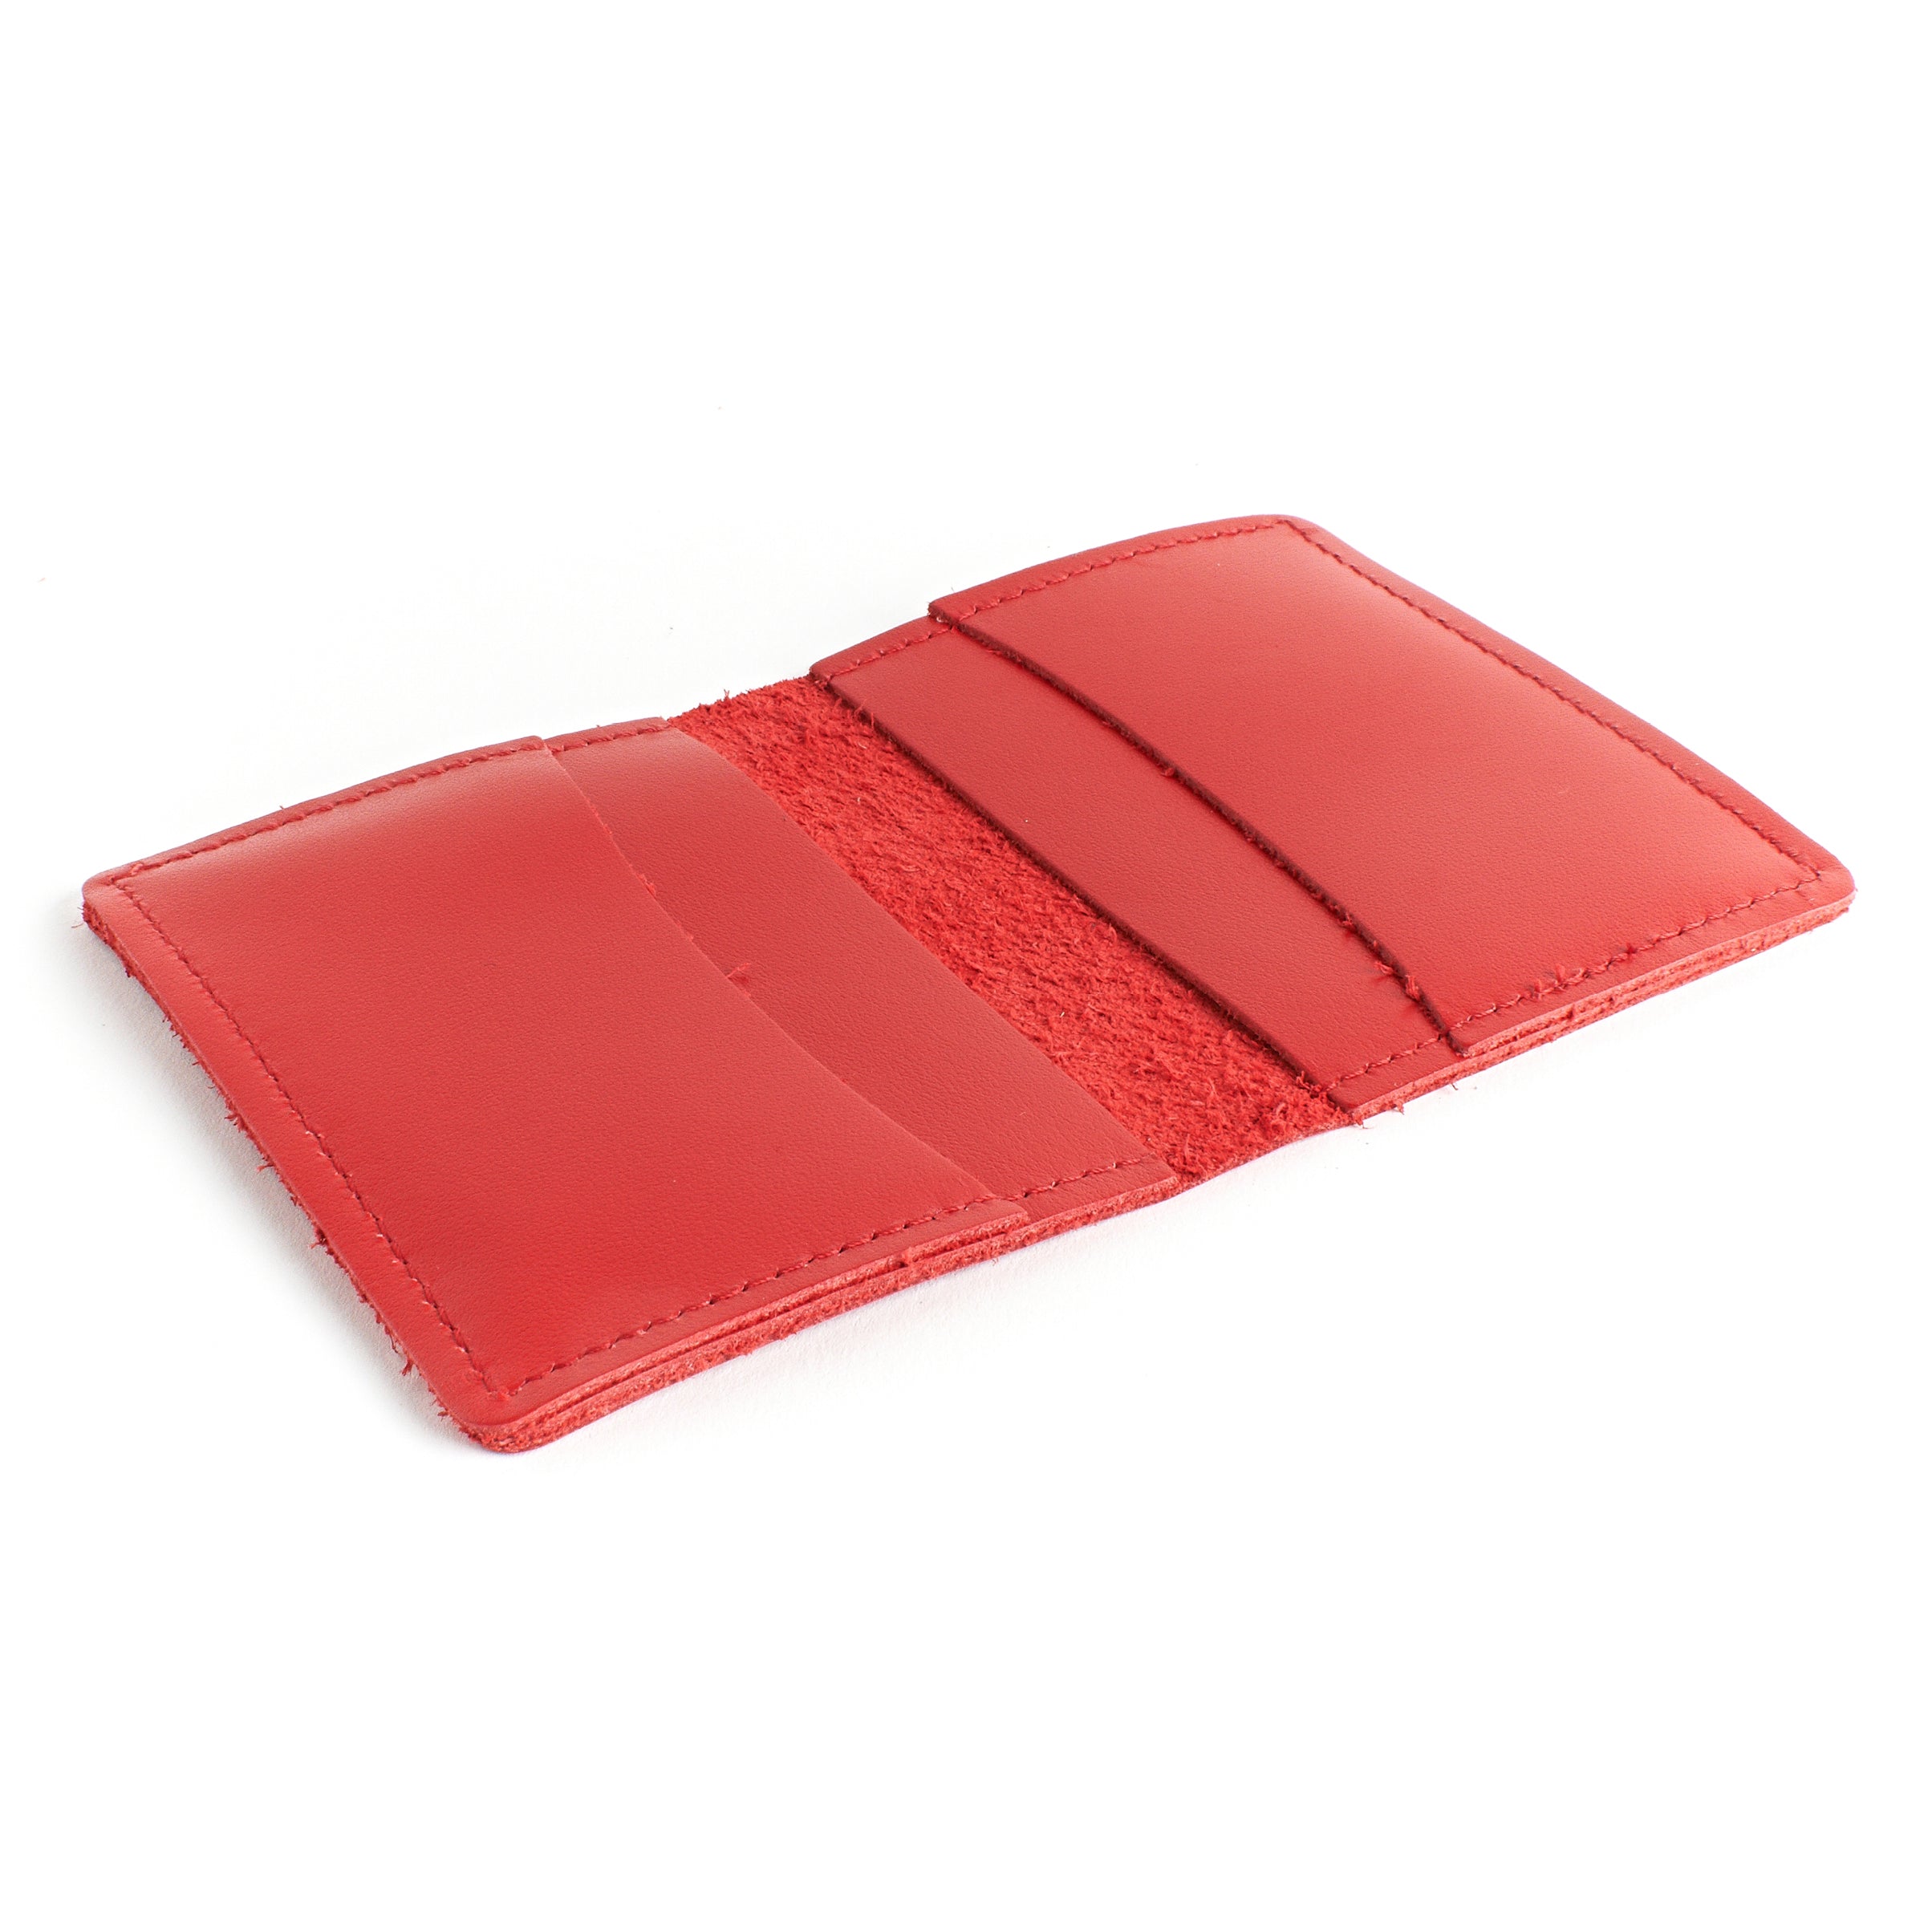 Smooth Red Slim Leather Wallet Open